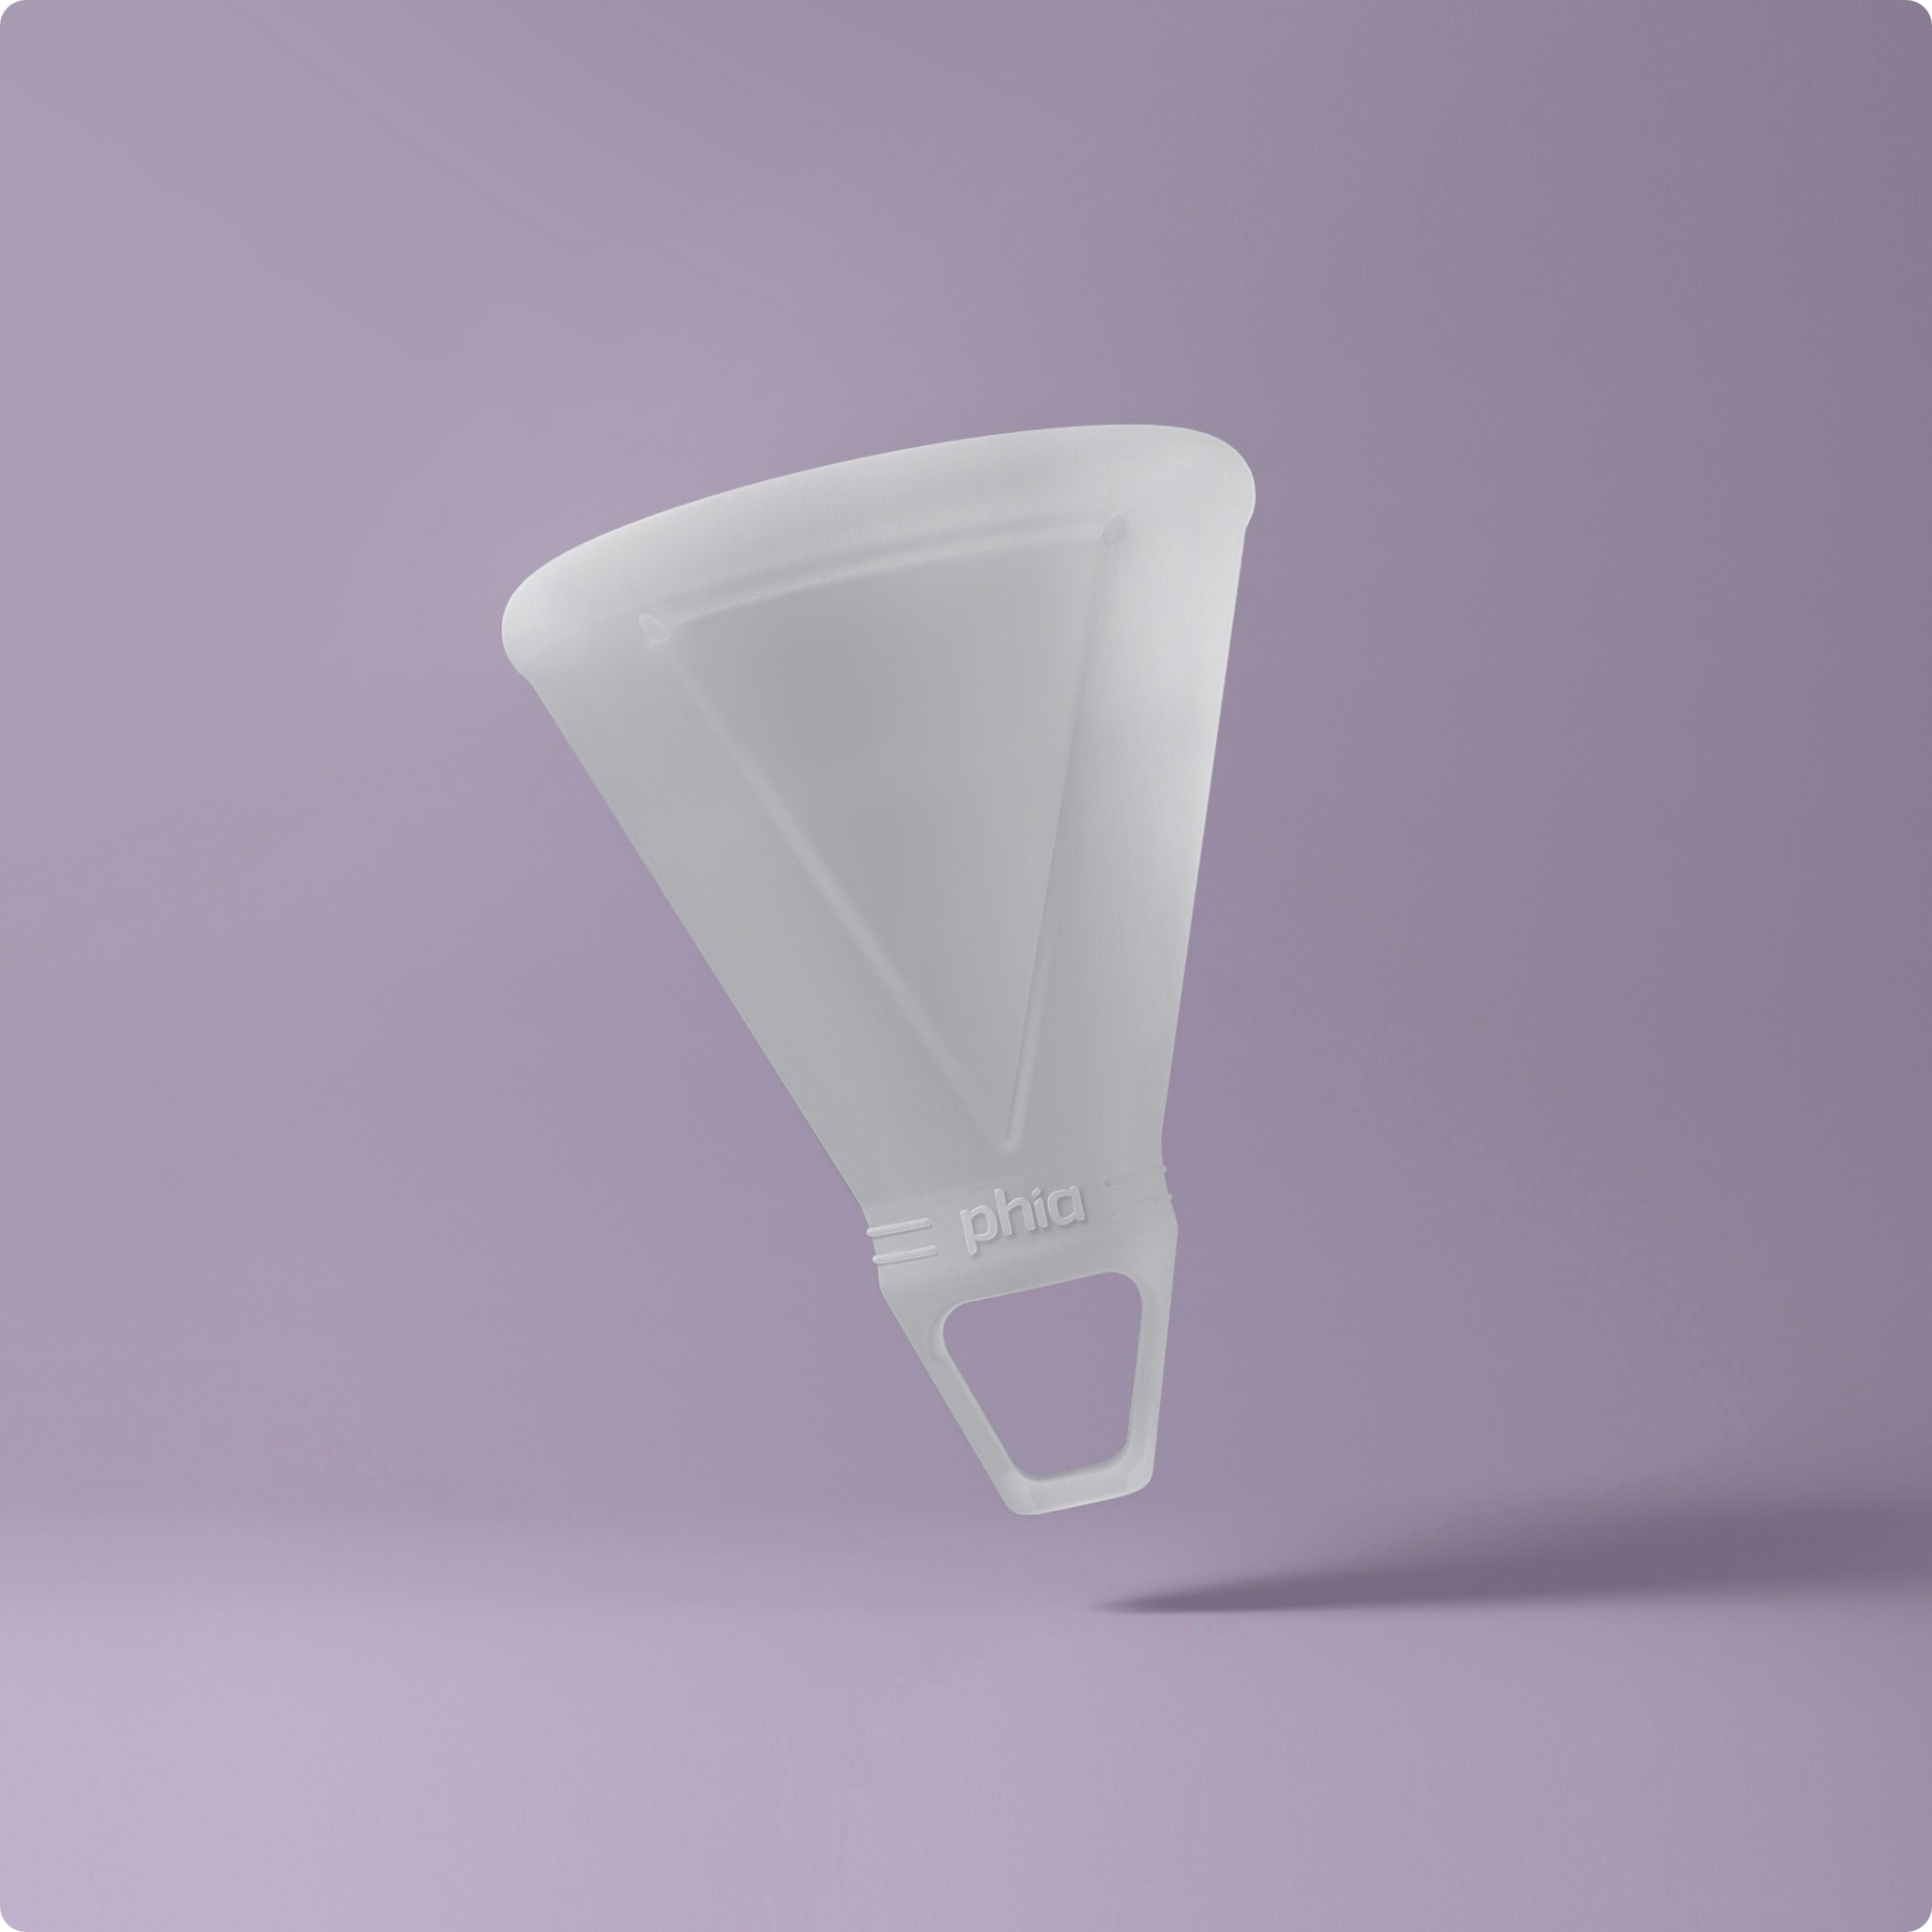 Phia Menstrual Cup showing all the unique features